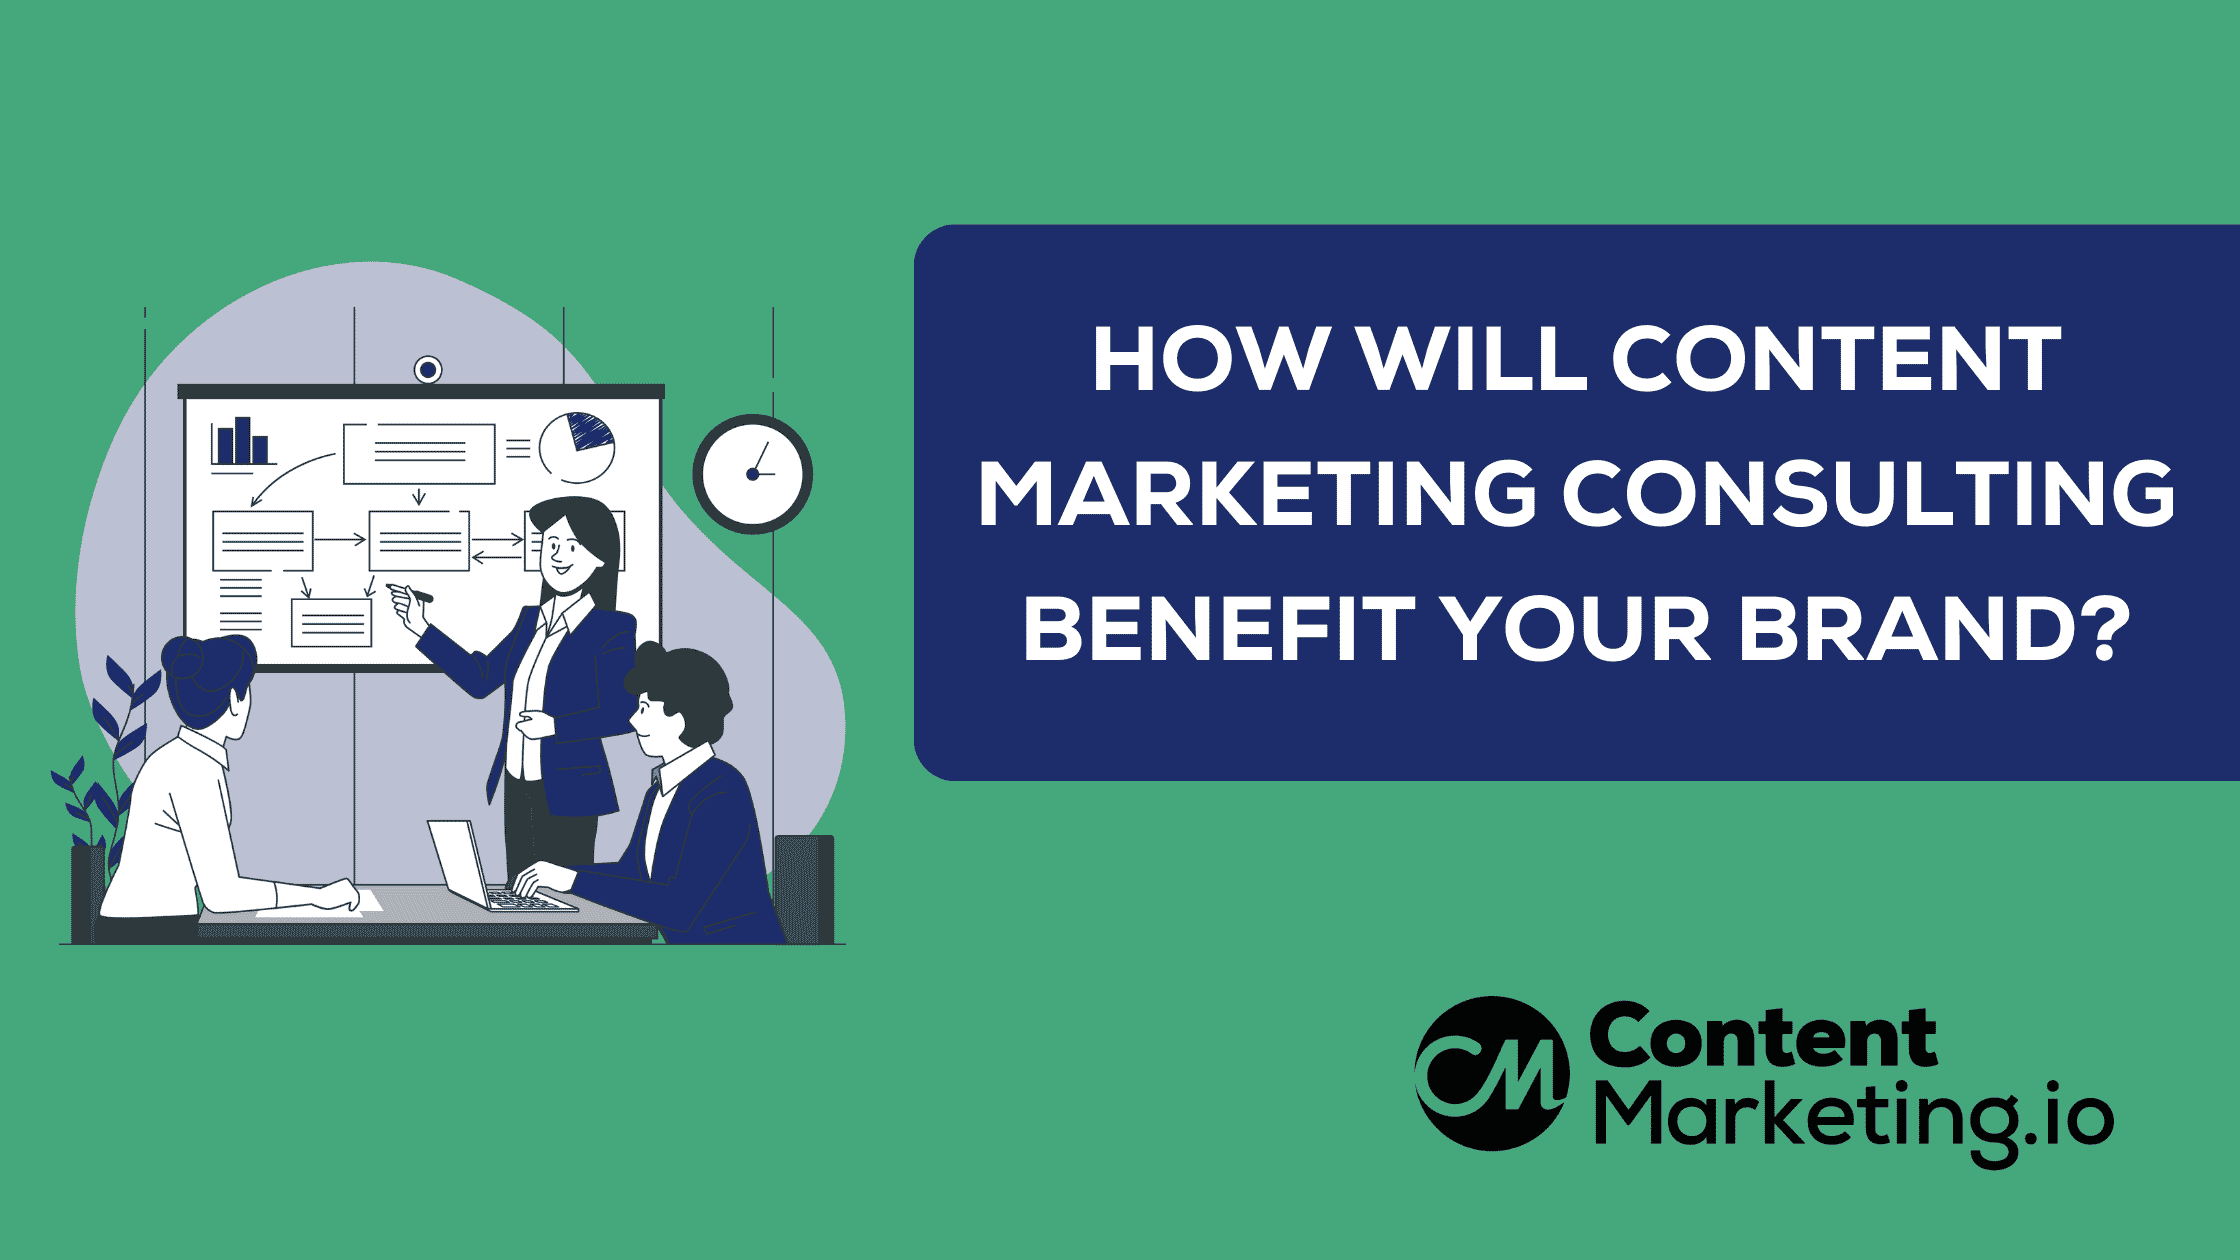 How Will Content Marketing Consulting Benefit Your Brand